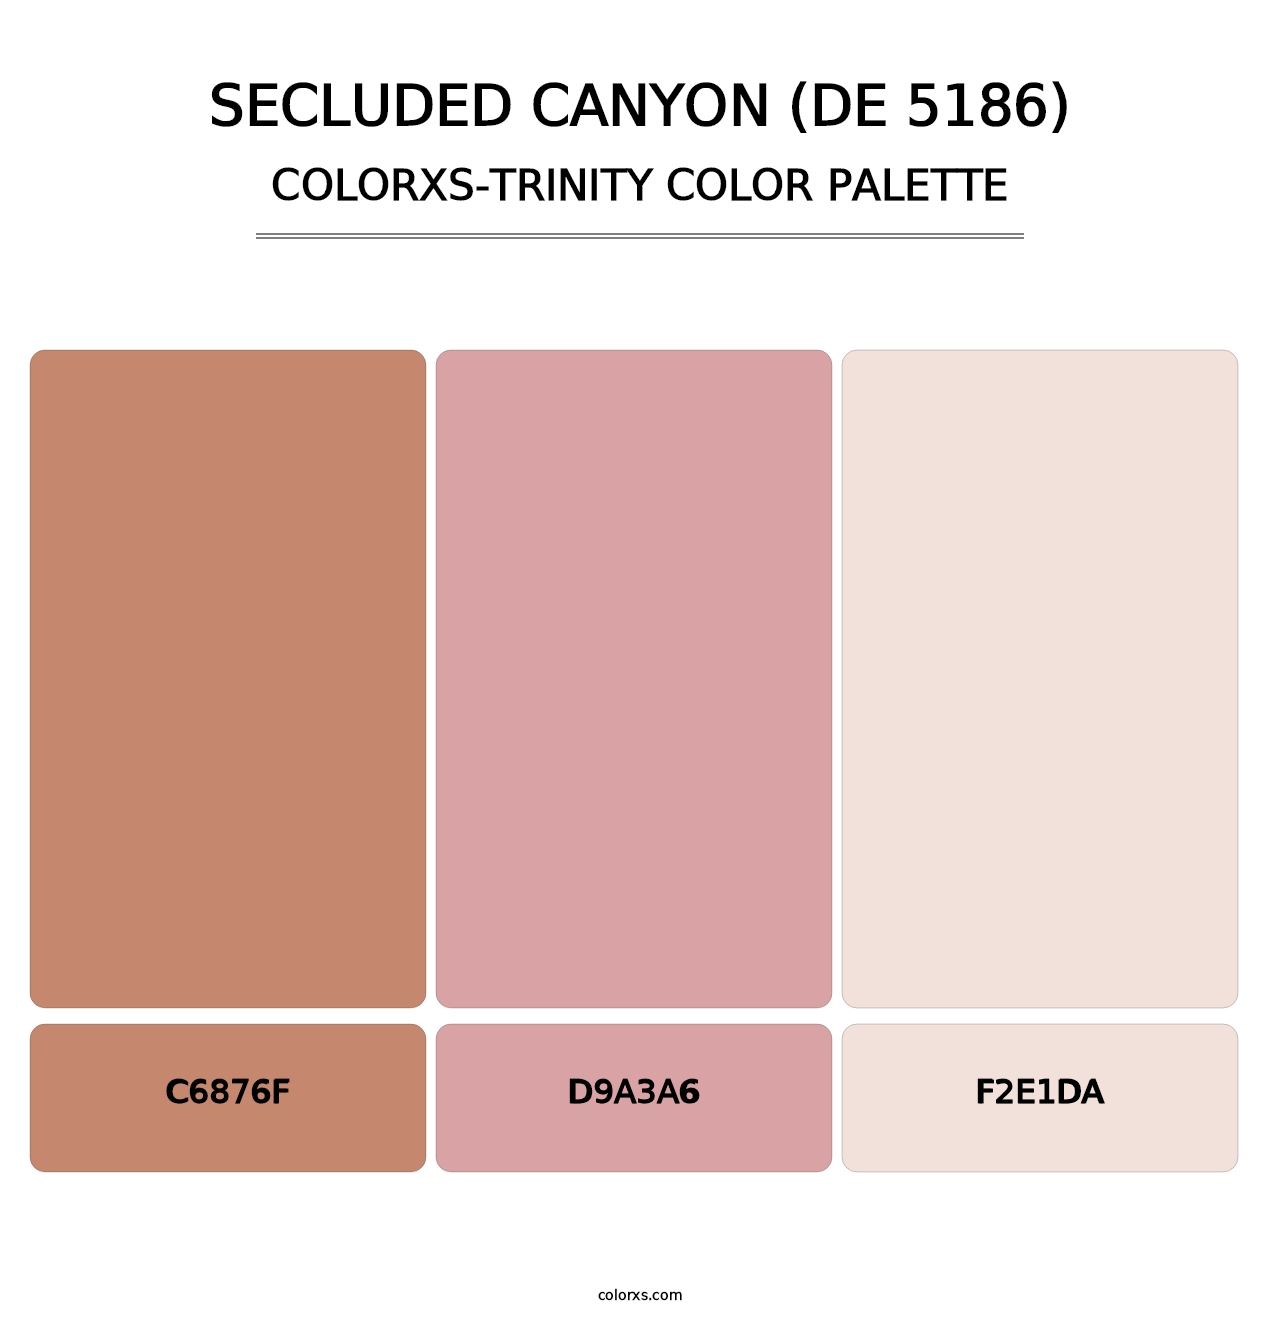 Secluded Canyon (DE 5186) - Colorxs Trinity Palette